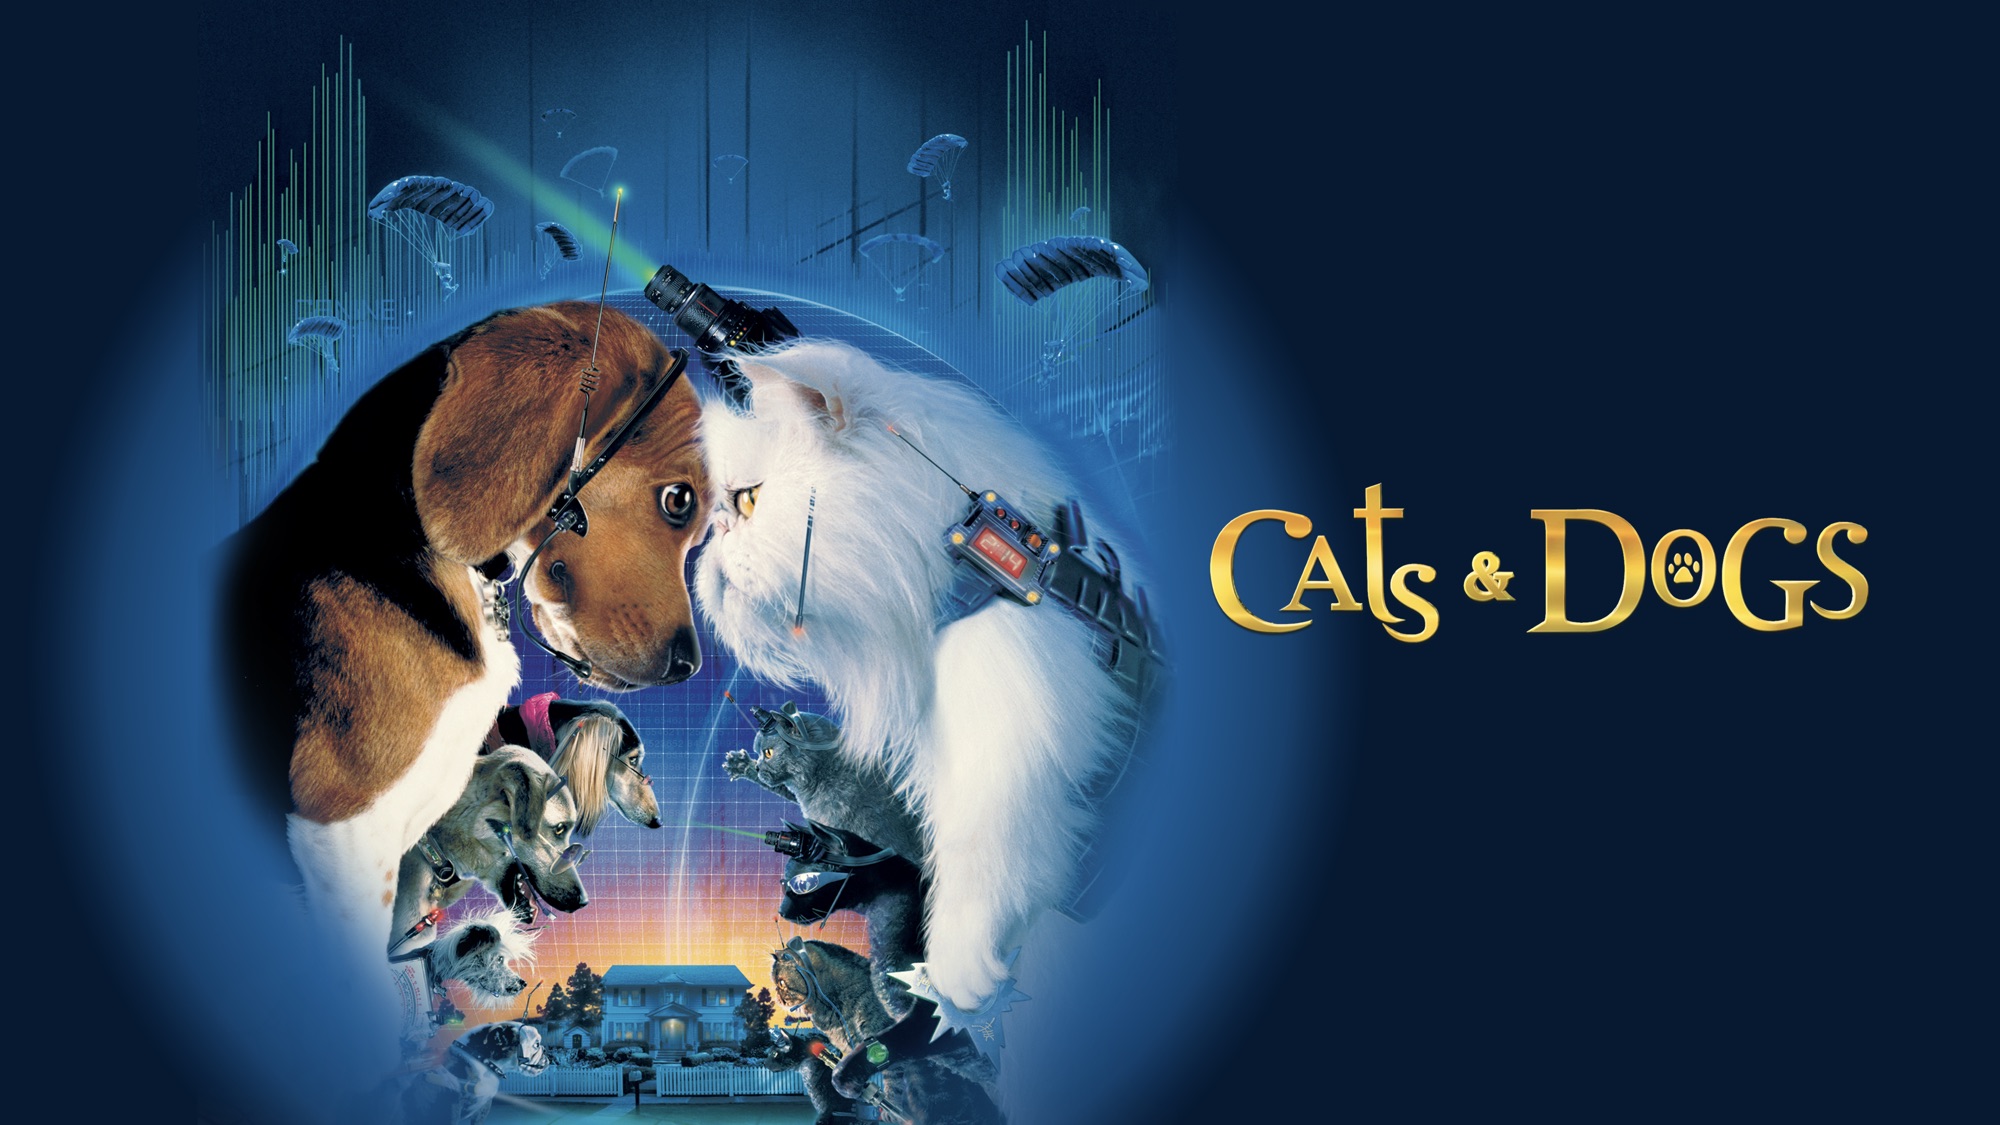 Movie Cats & Dogs HD Wallpaper